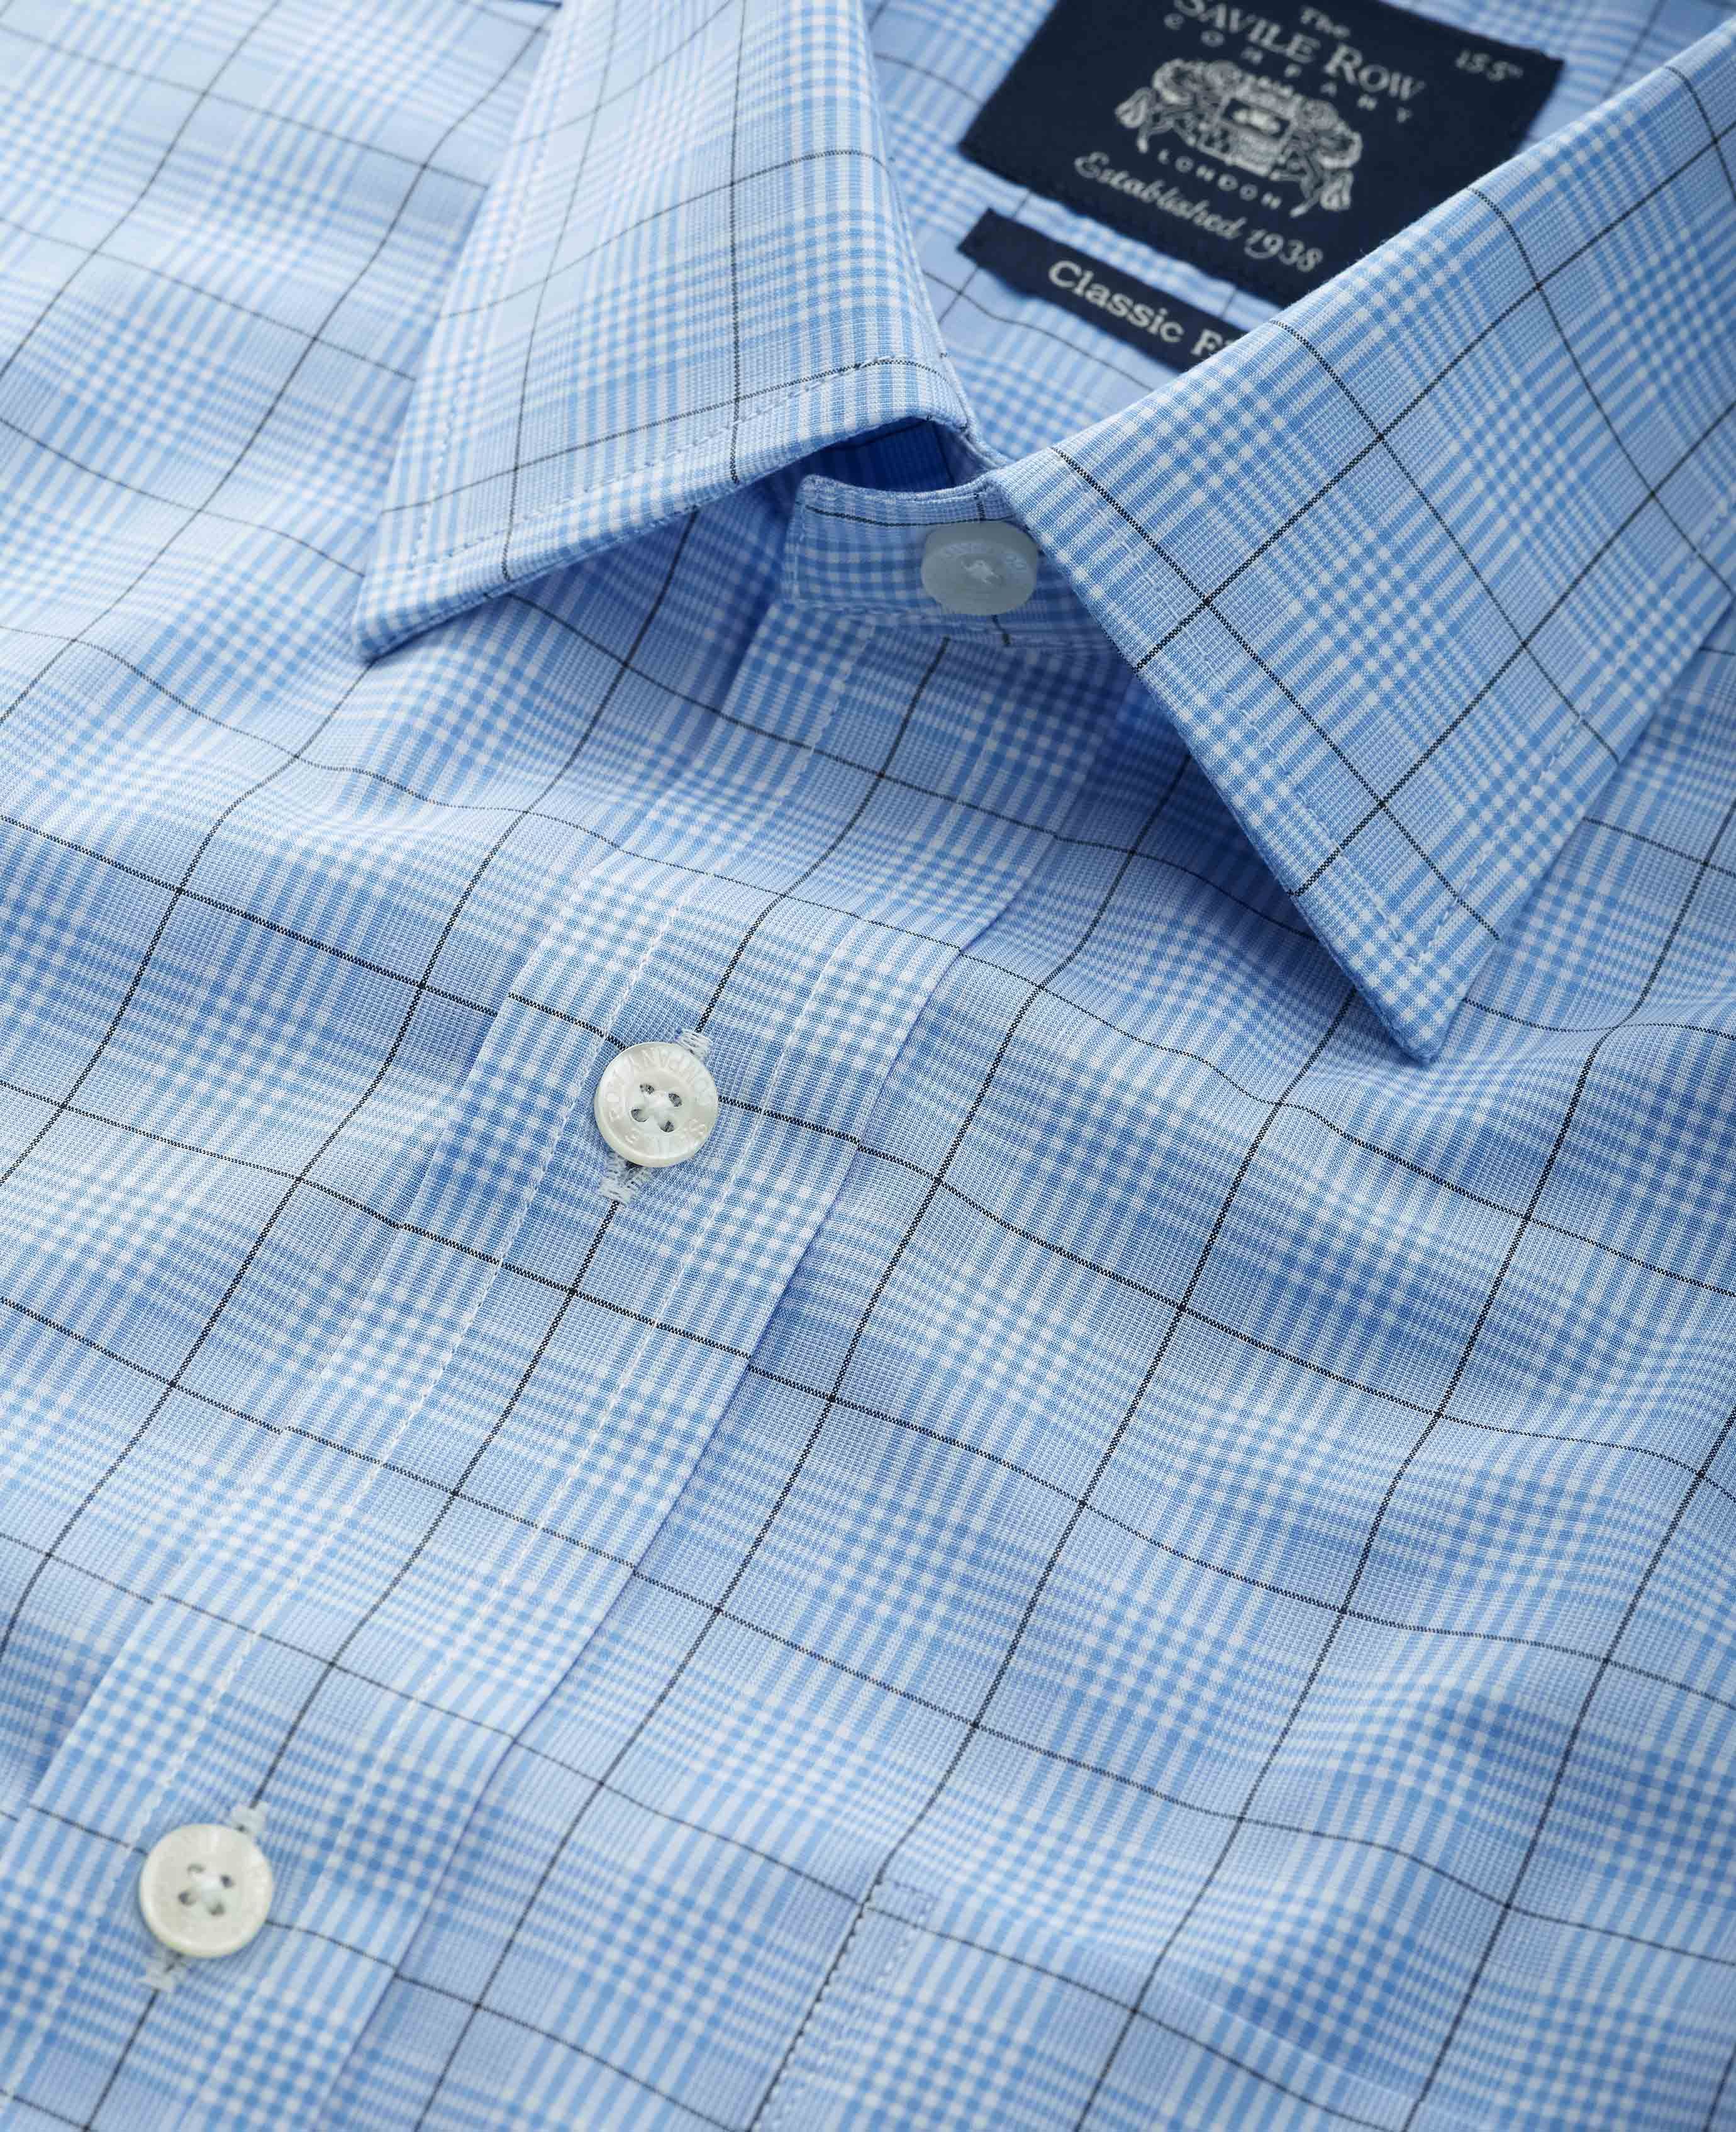 Men s Classic Fit Shirt in Navy POW Check | Savile Row Co